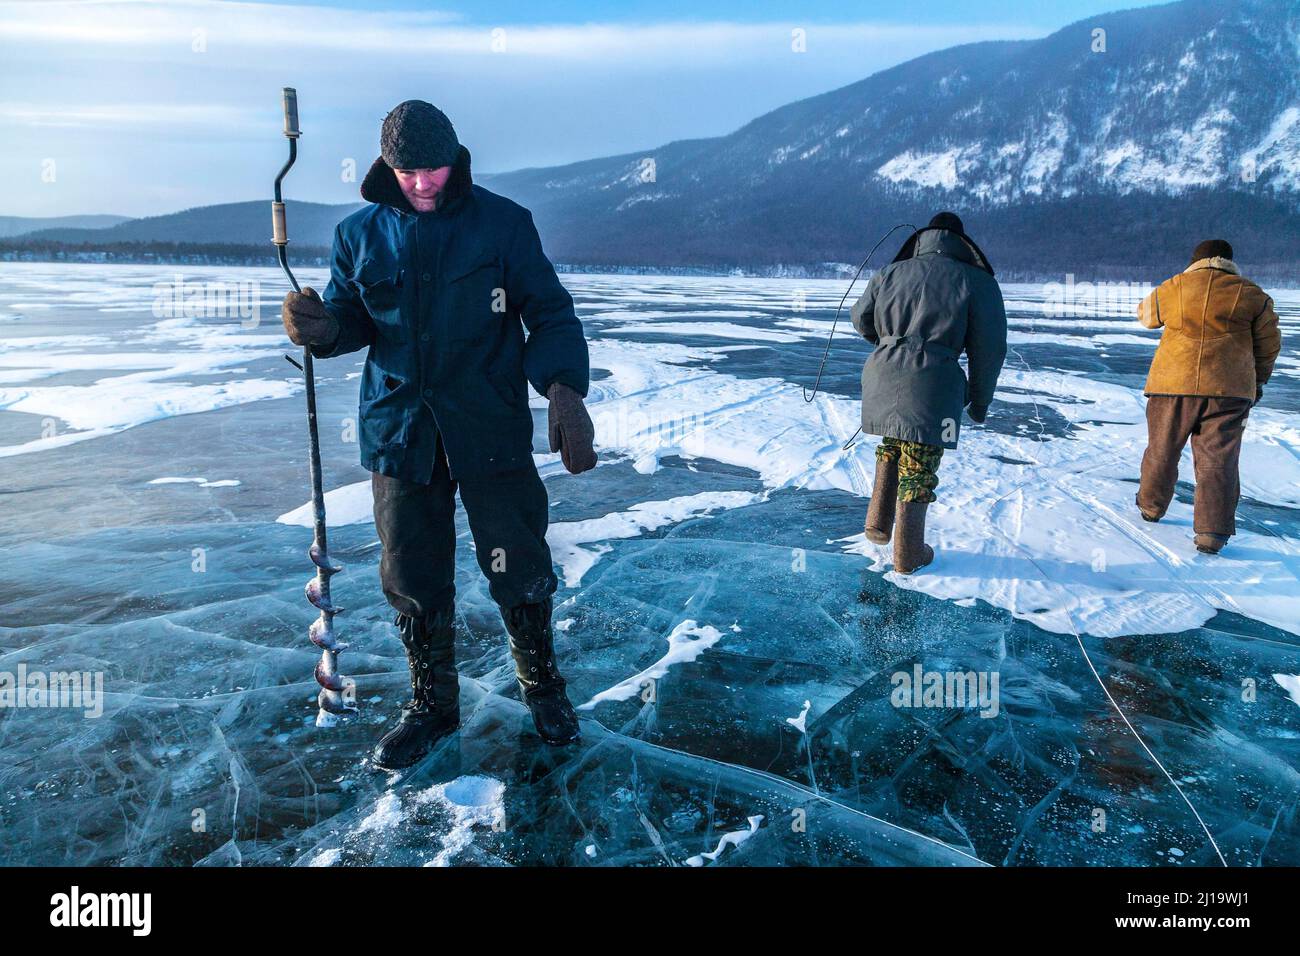 Ice fishing, A young fisherman digging a hole in the ice formed over Lake Baikal to fish, Lake Baikal, Severo Baikalsk, Siberia, Russia, Asia Stock Photo